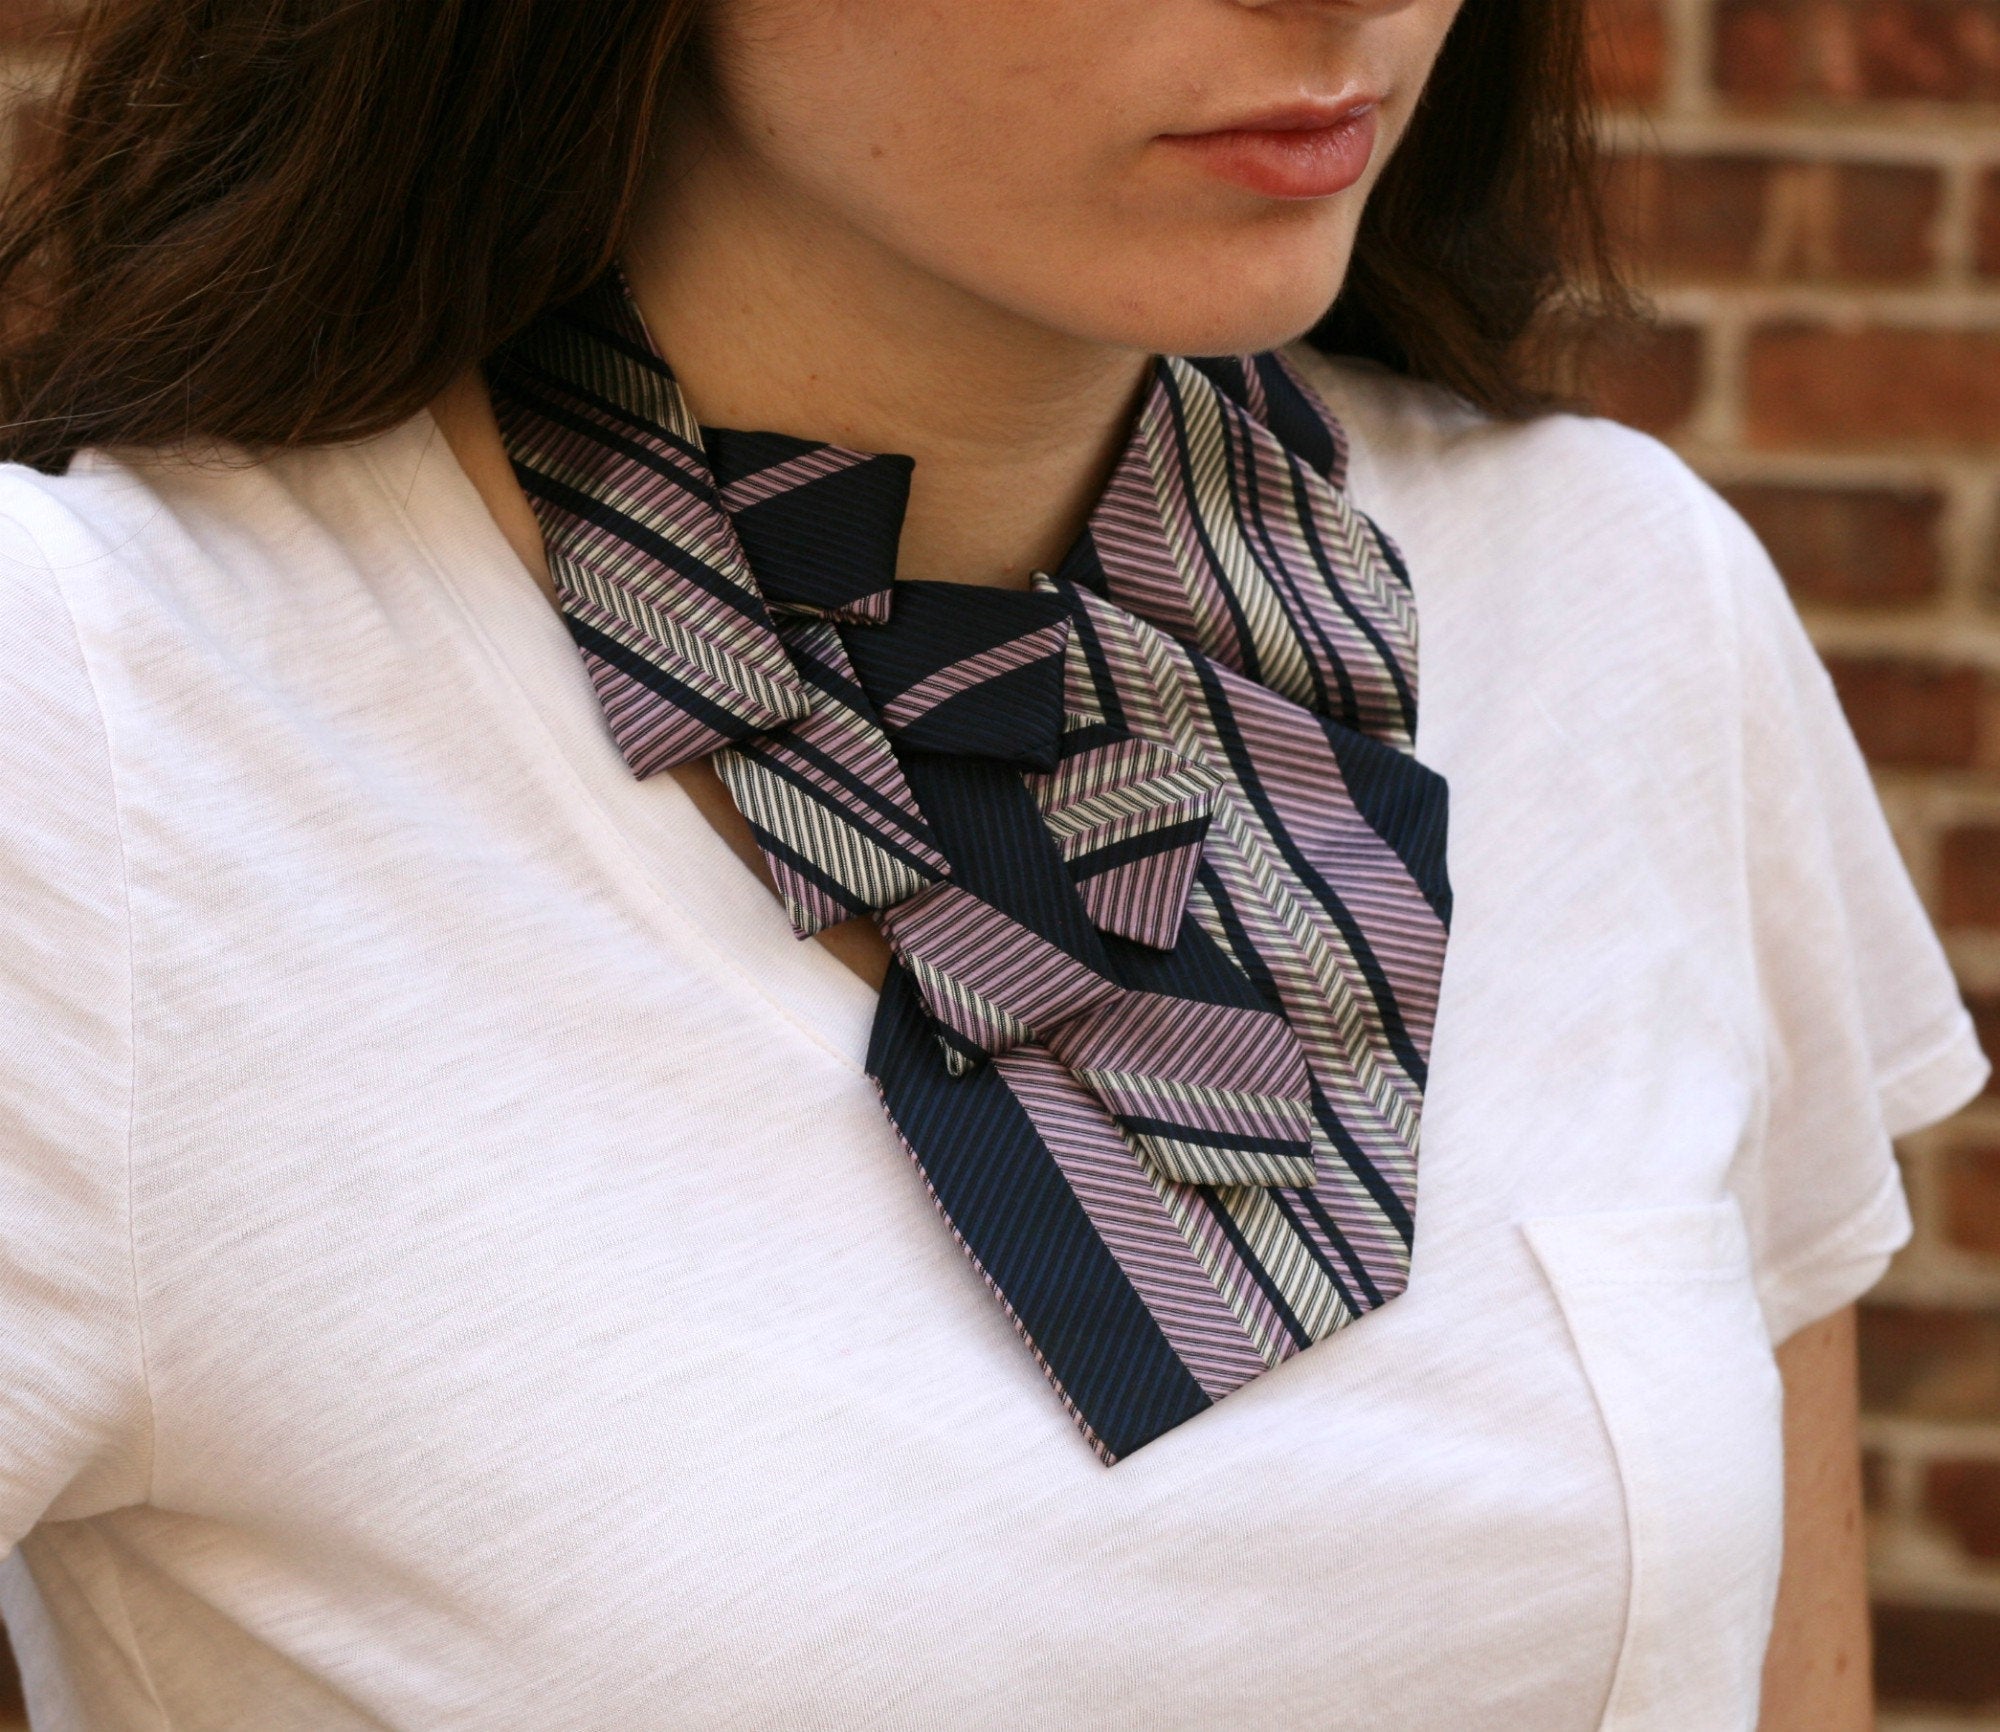 Vintage Scarf Women - Neck Tie Scarf - Striped Scarf - Gift For Daughter - Business Fashion. 71